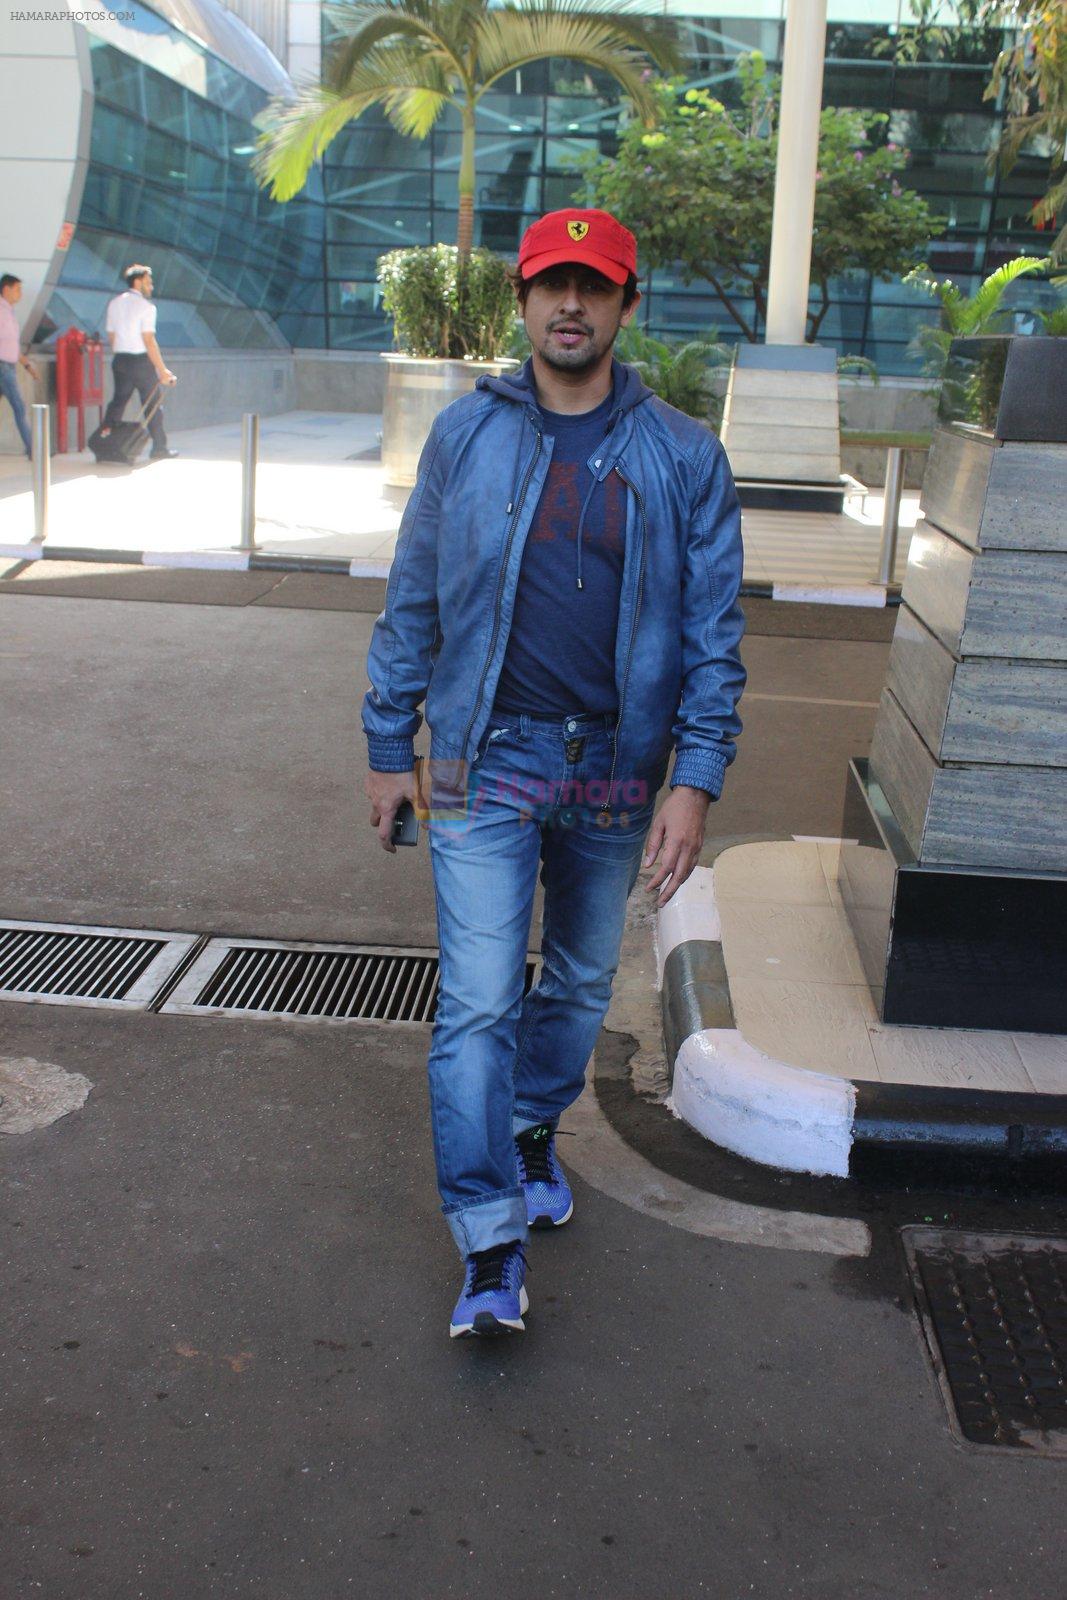 Sonu Nigam snapped at airport on 20th March 2016